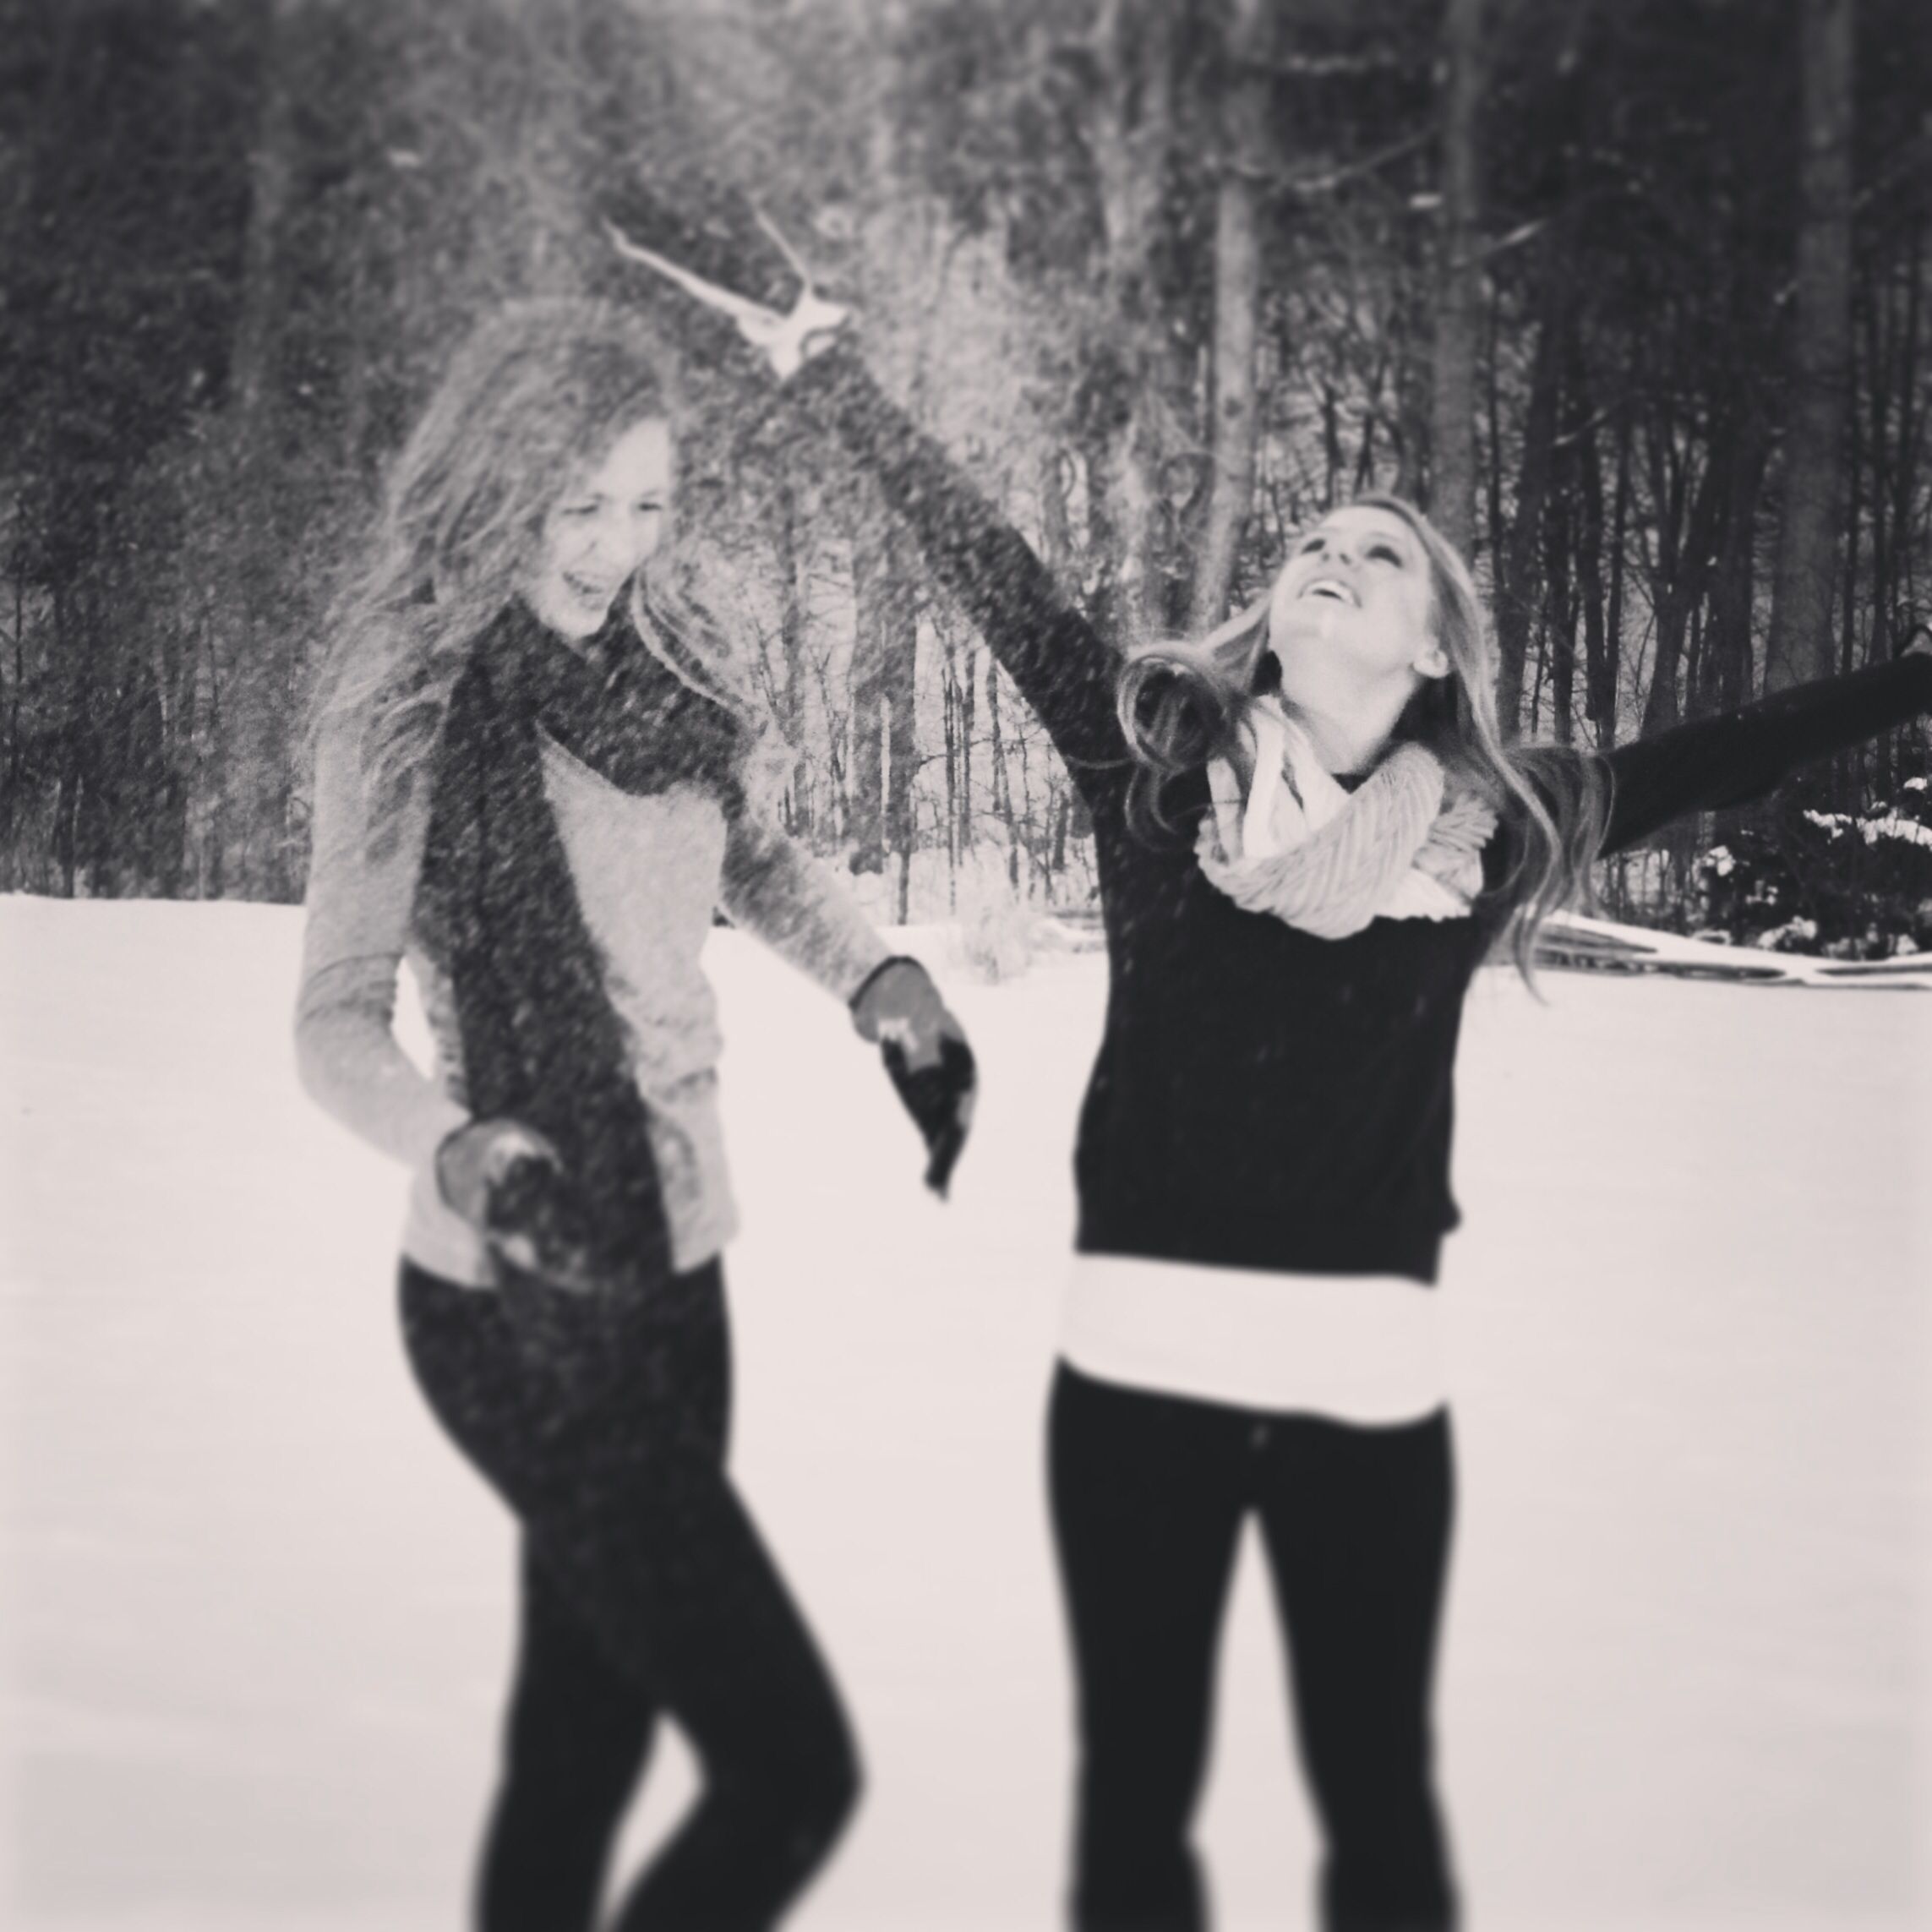 Knowing me and my bestfriend, we’d turn this into a snow ball fight….